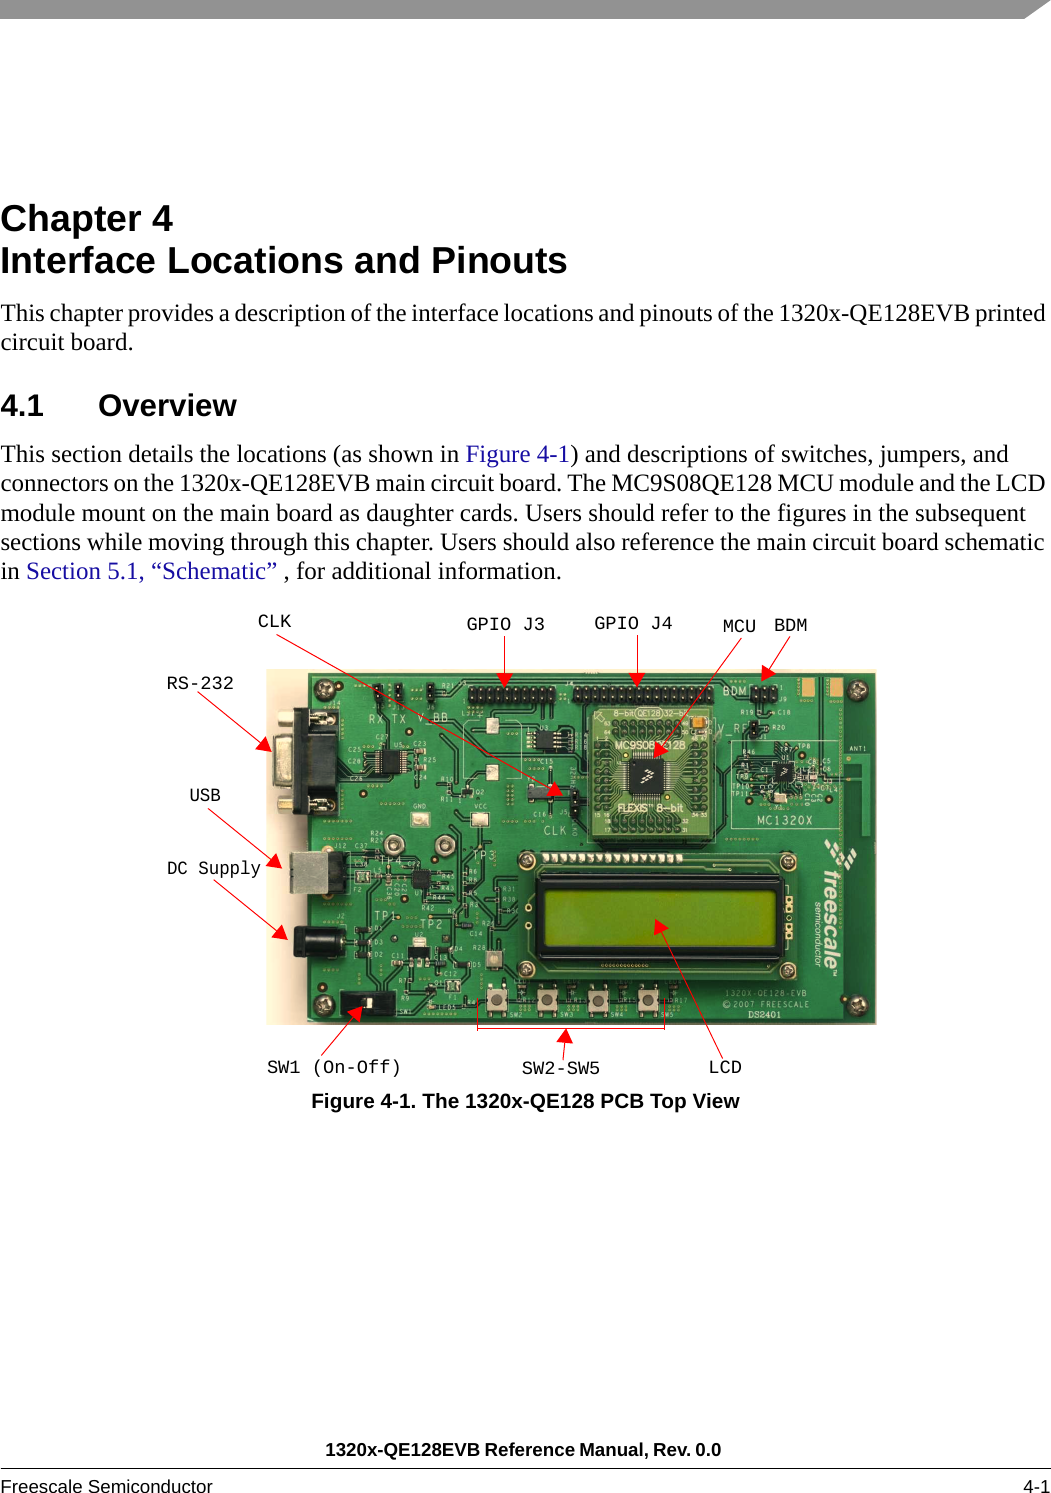 1320x-QE128EVB Reference Manual, Rev. 0.0 Freescale Semiconductor 4-1Chapter 4  Interface Locations and PinoutsThis chapter provides a description of the interface locations and pinouts of the 1320x-QE128EVB printed circuit board. 4.1 OverviewThis section details the locations (as shown in Figure 4-1) and descriptions of switches, jumpers, and connectors on the 1320x-QE128EVB main circuit board. The MC9S08QE128 MCU module and the LCD module mount on the main board as daughter cards. Users should refer to the figures in the subsequent sections while moving through this chapter. Users should also reference the main circuit board schematic in Section 5.1, “Schematic” , for additional information.Figure 4-1. The 1320x-QE128 PCB Top ViewLCDCLK GPIO J3 GPIO J4 MCU BDMSW2-SW5RS-232USBDC SupplySW1 (On-Off)